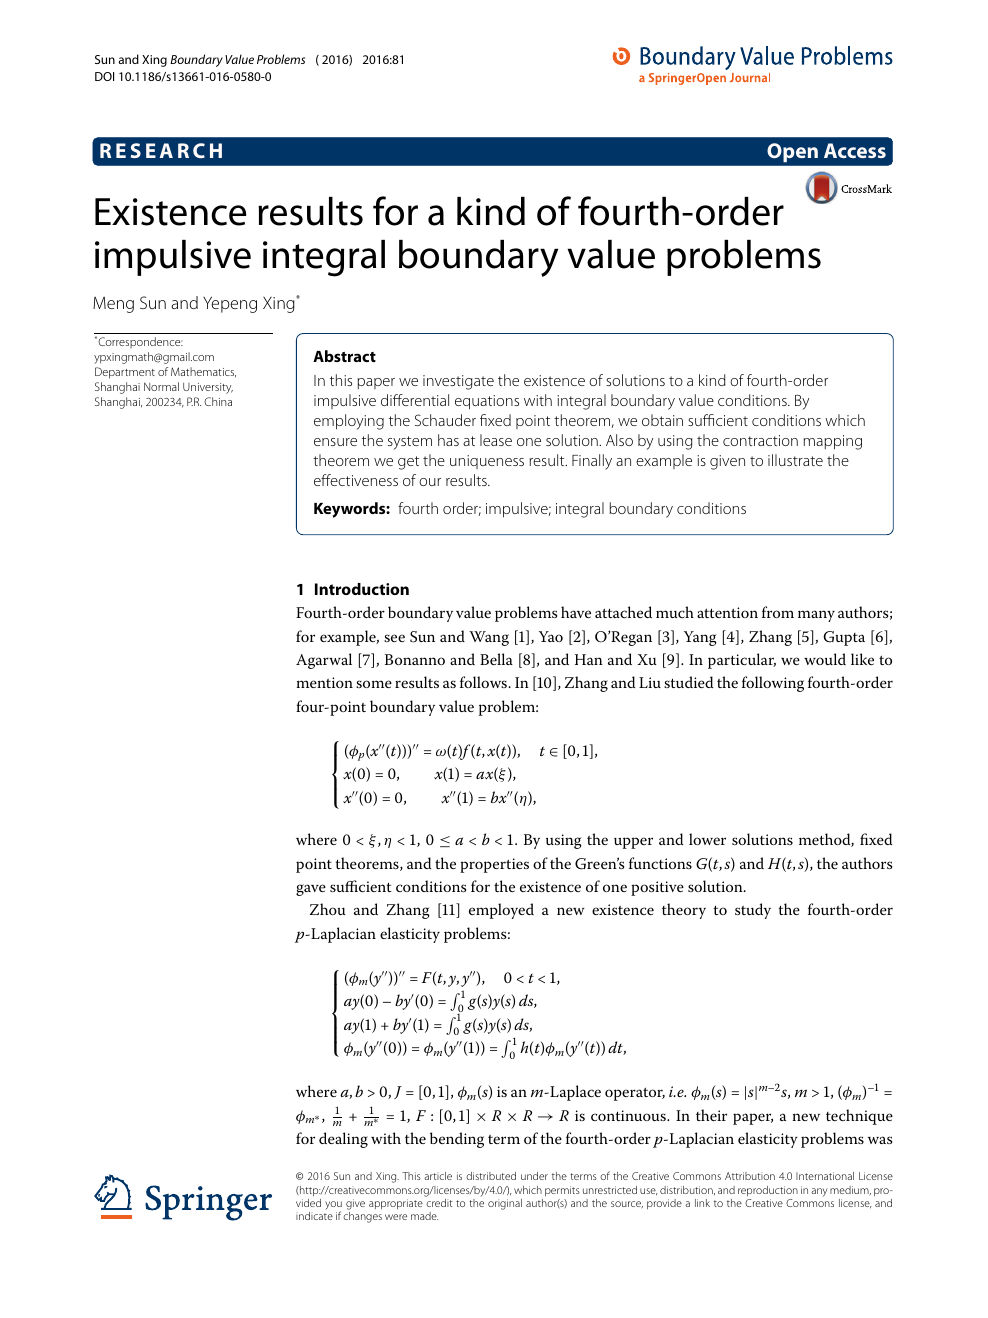 Existence Results For A Kind Of Fourth Order Impulsive Integral Boundary Value Problems Topic Of Research Paper In Mathematics Download Scholarly Article Pdf And Read For Free On Cyberleninka Open Science Hub